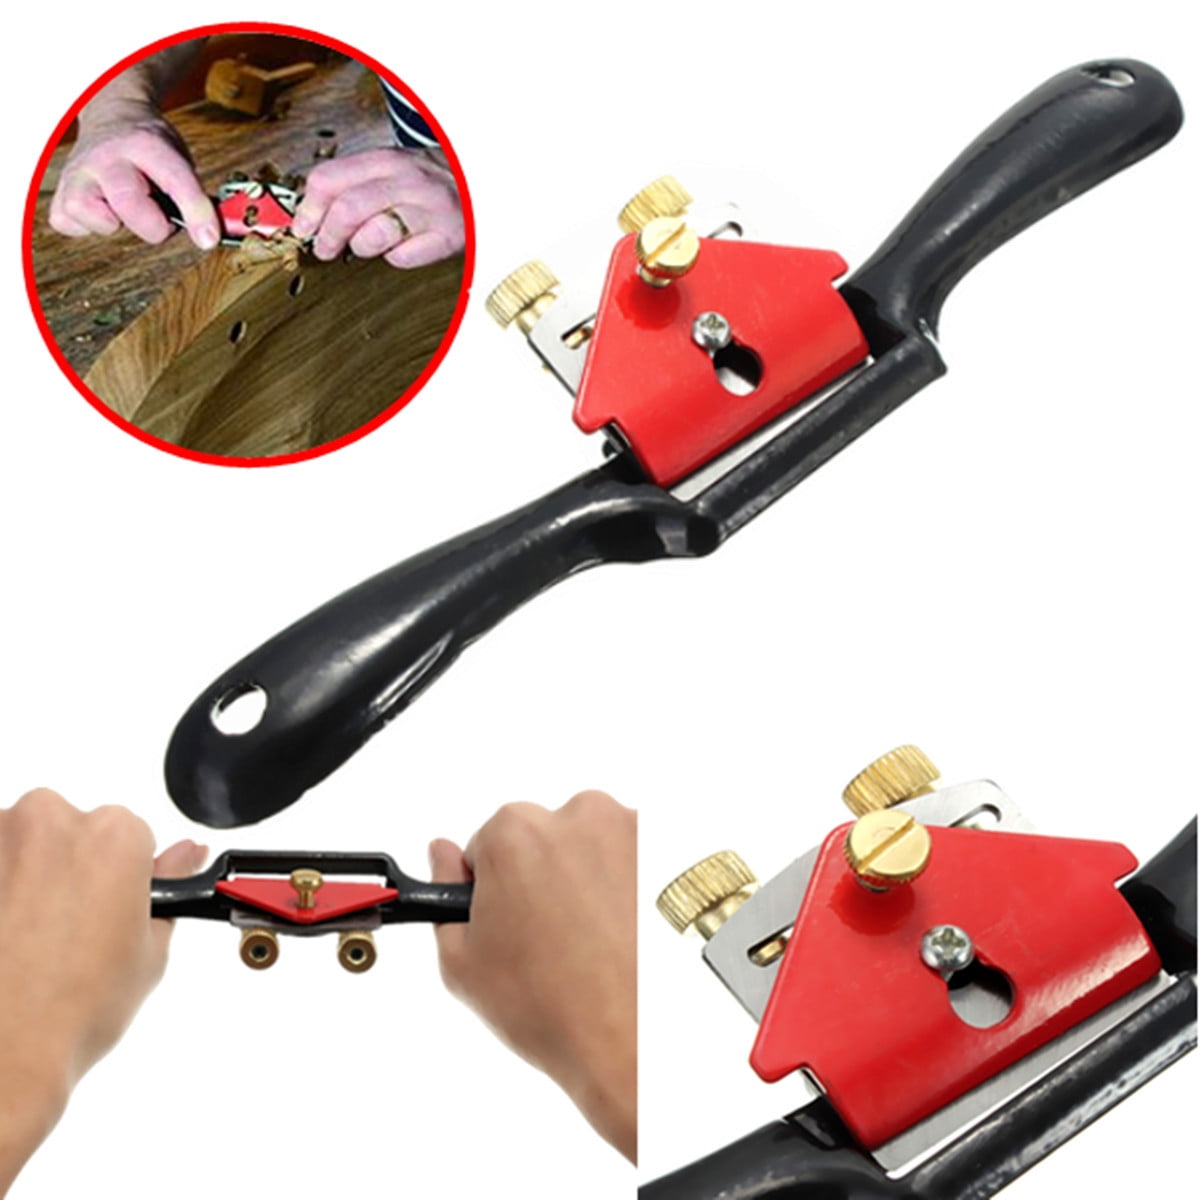 9inch Woodworking Blade Cutting Trimming Manual Planer Plane Deburring Hand Tool 